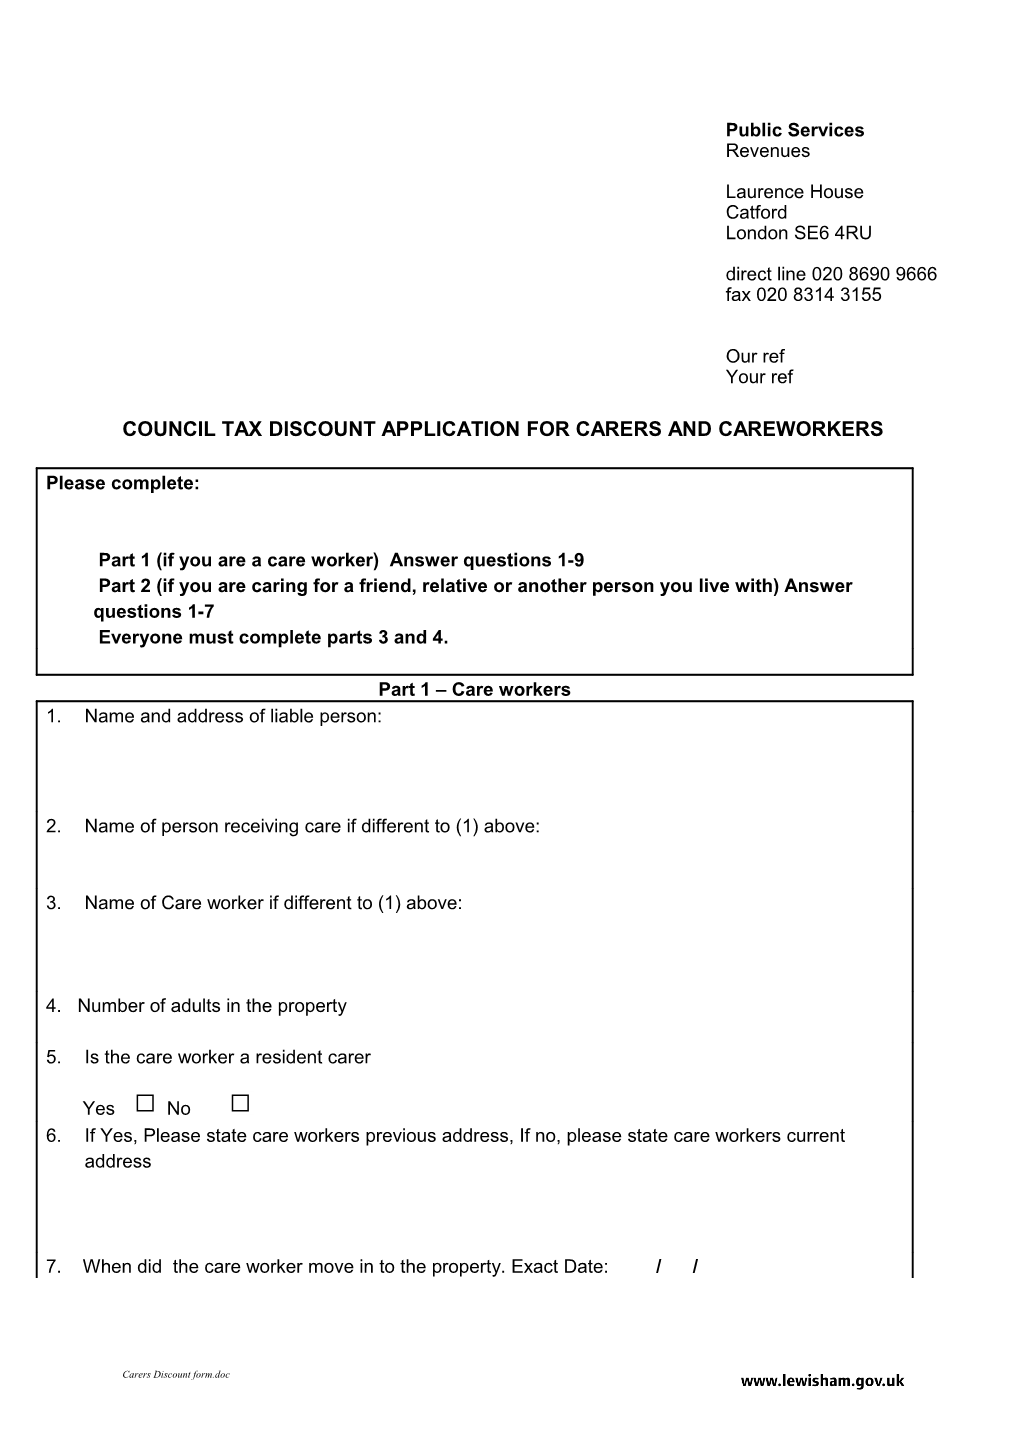 Council Tax Discount Application for Carers and Care Workers